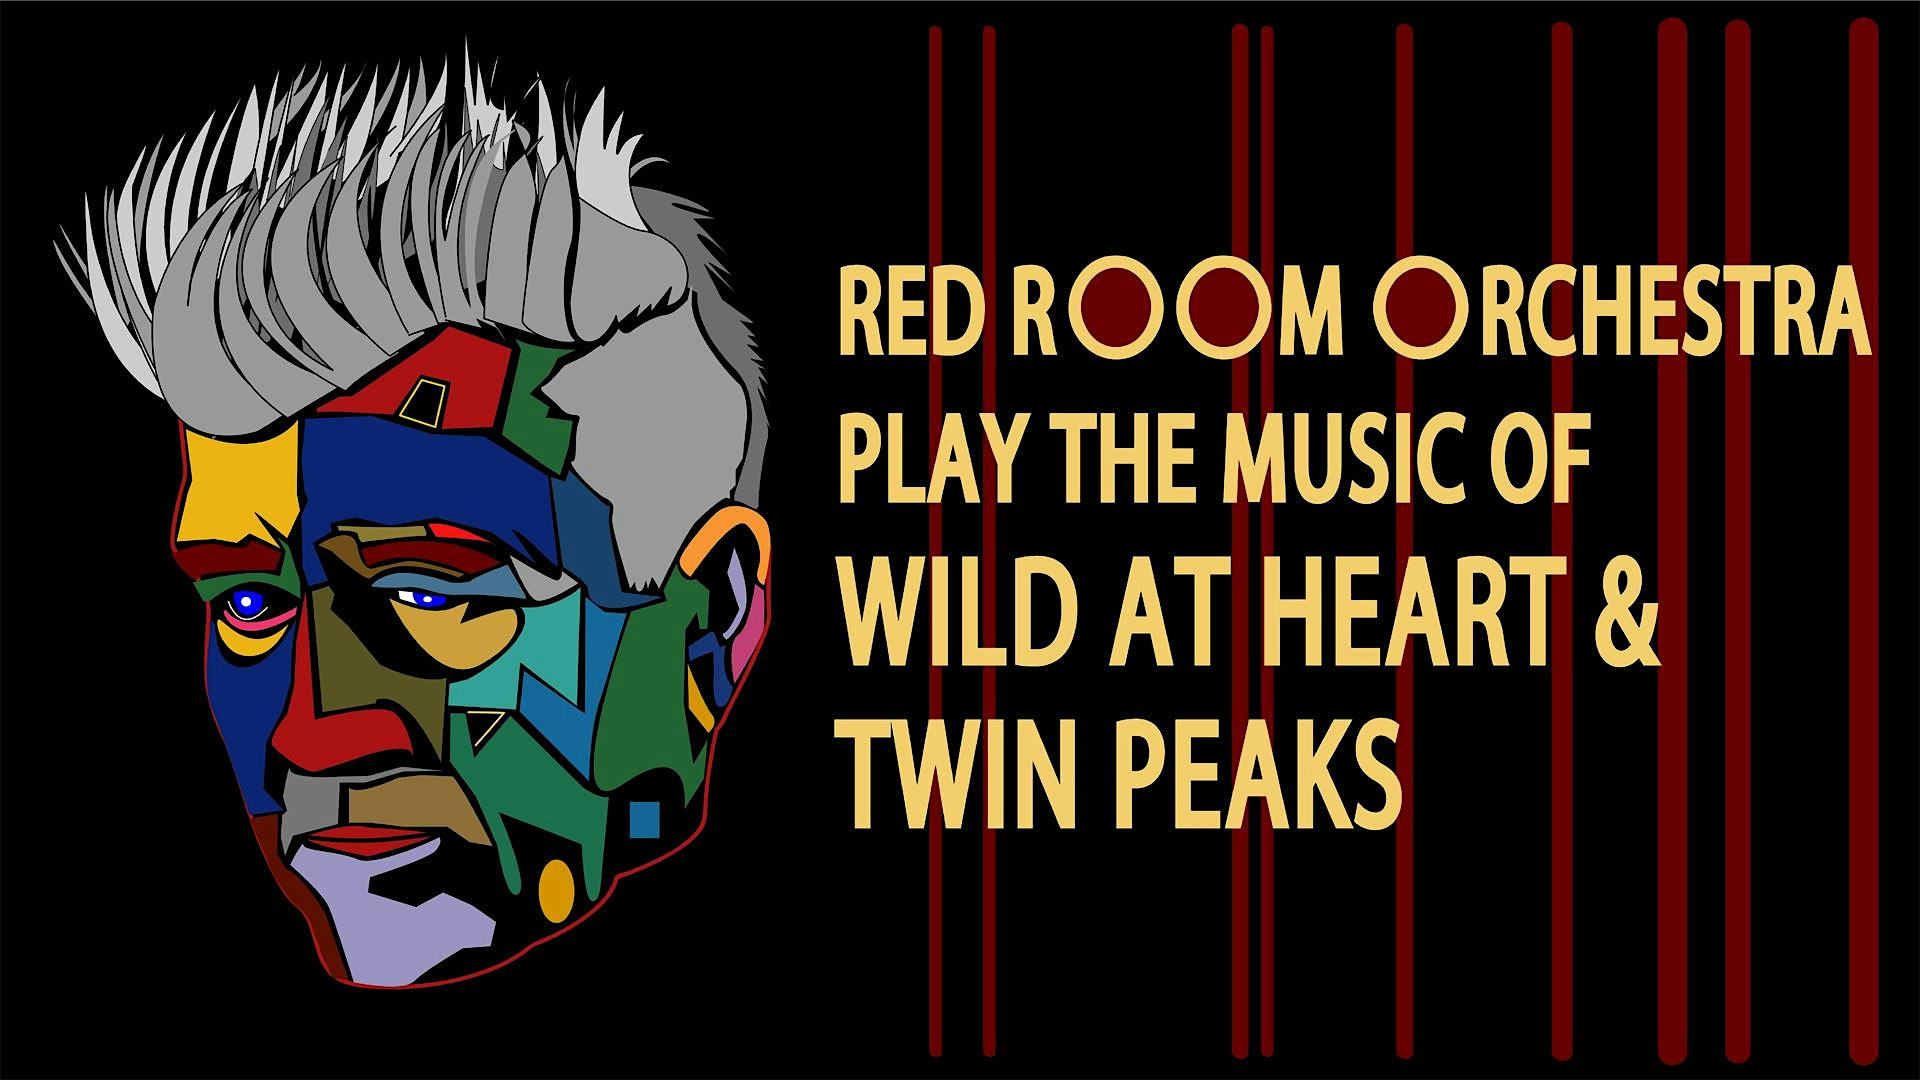 Red Room Orchestra Play The Music Of Wild At Heart Twin